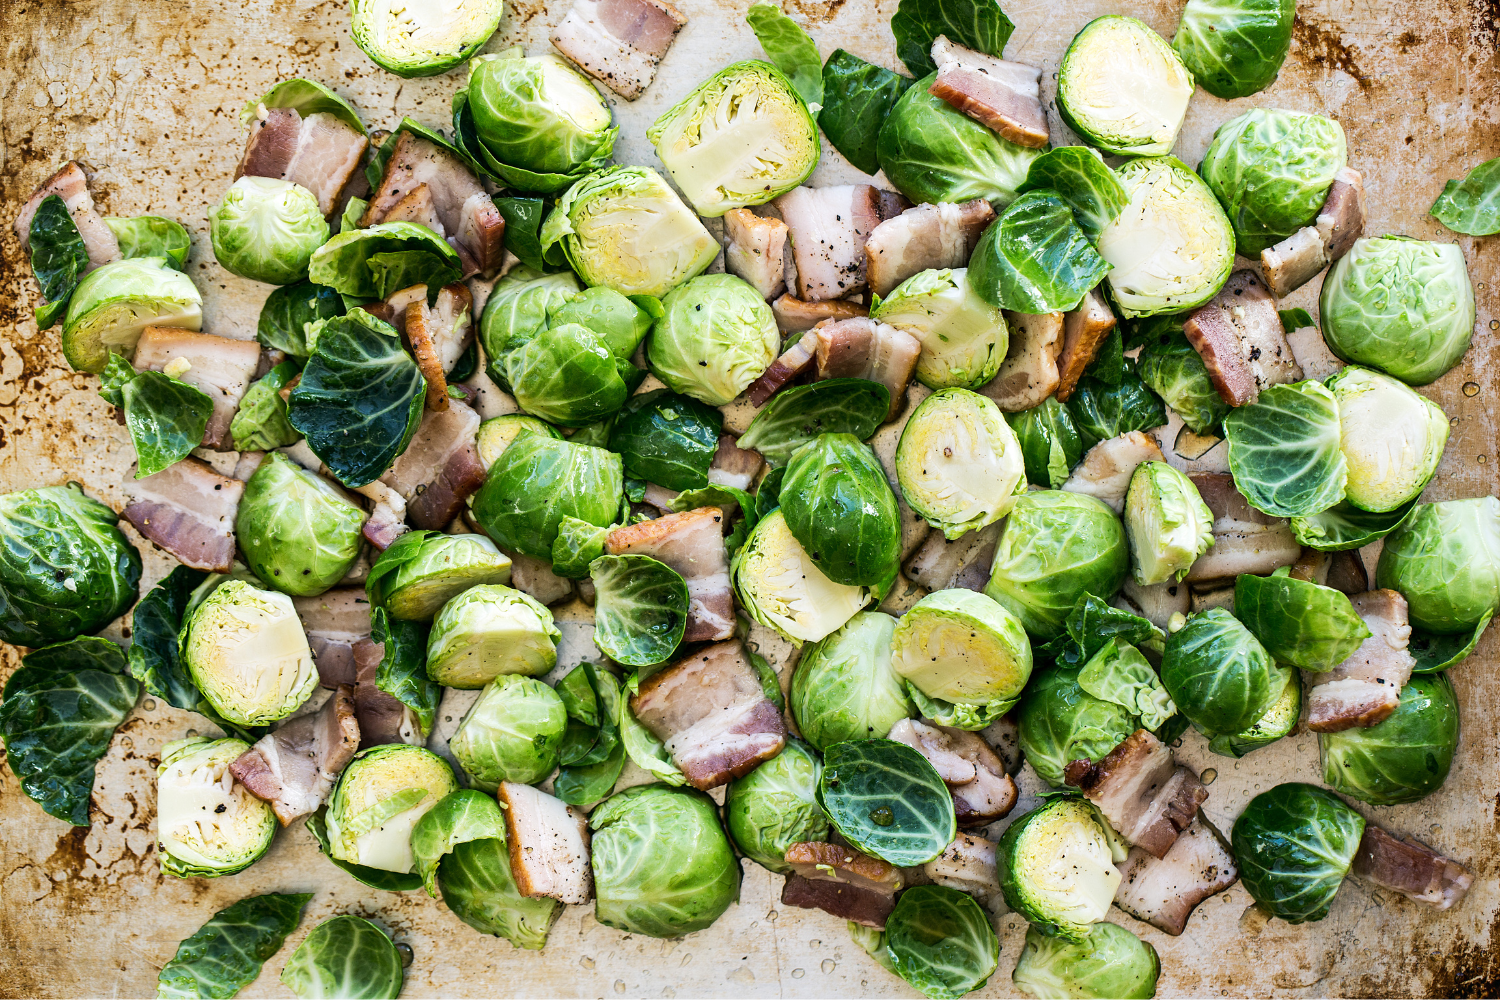 the uncooked halved Brussels sprouts and diced bacon on a baking tray, ready to bake.